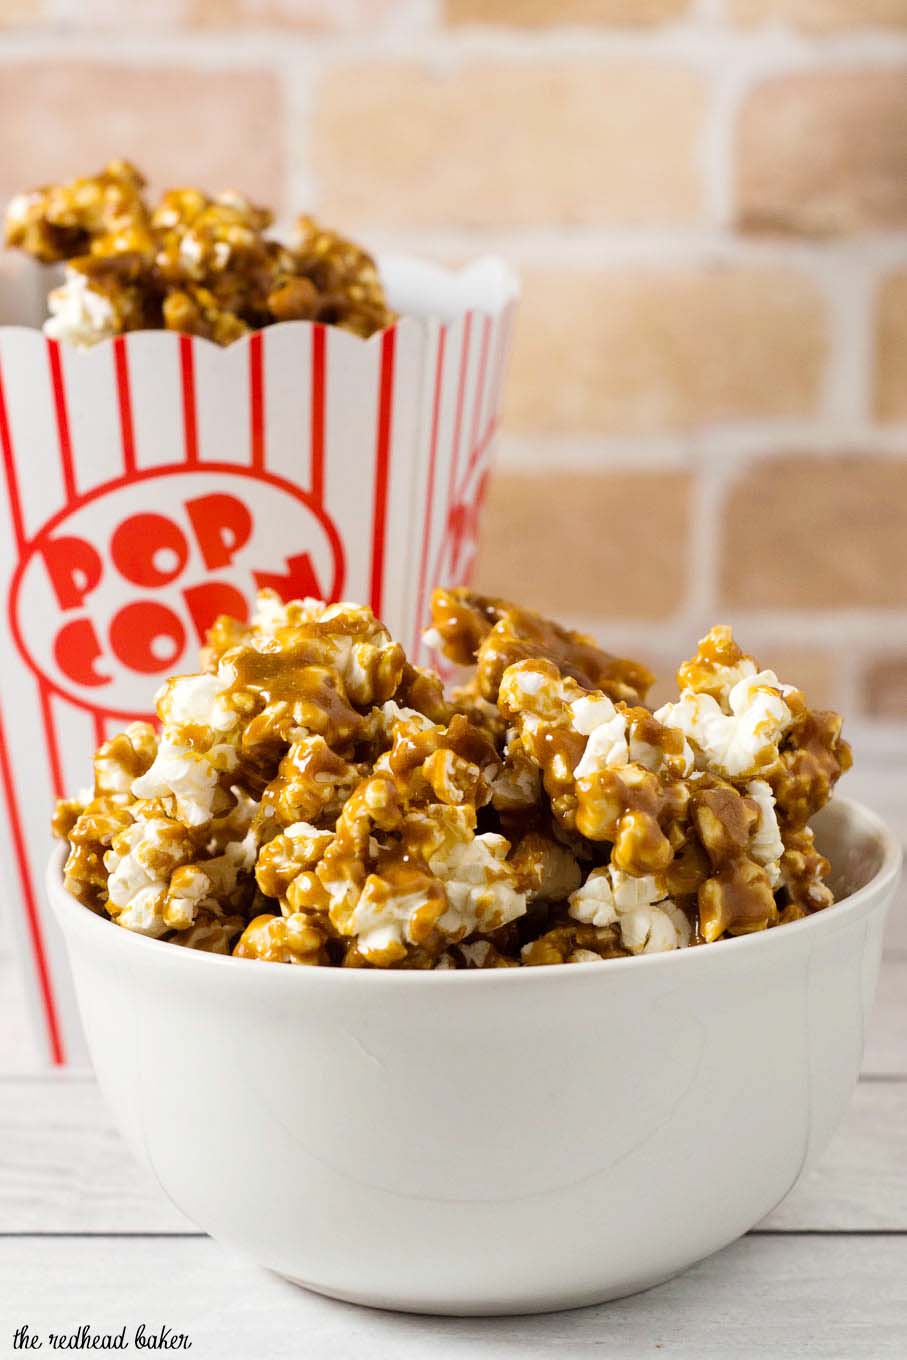 It's so easy to make your own buttery sweet caramel corn at home! This oldie-but-goodie snack will be a hit at any party. 